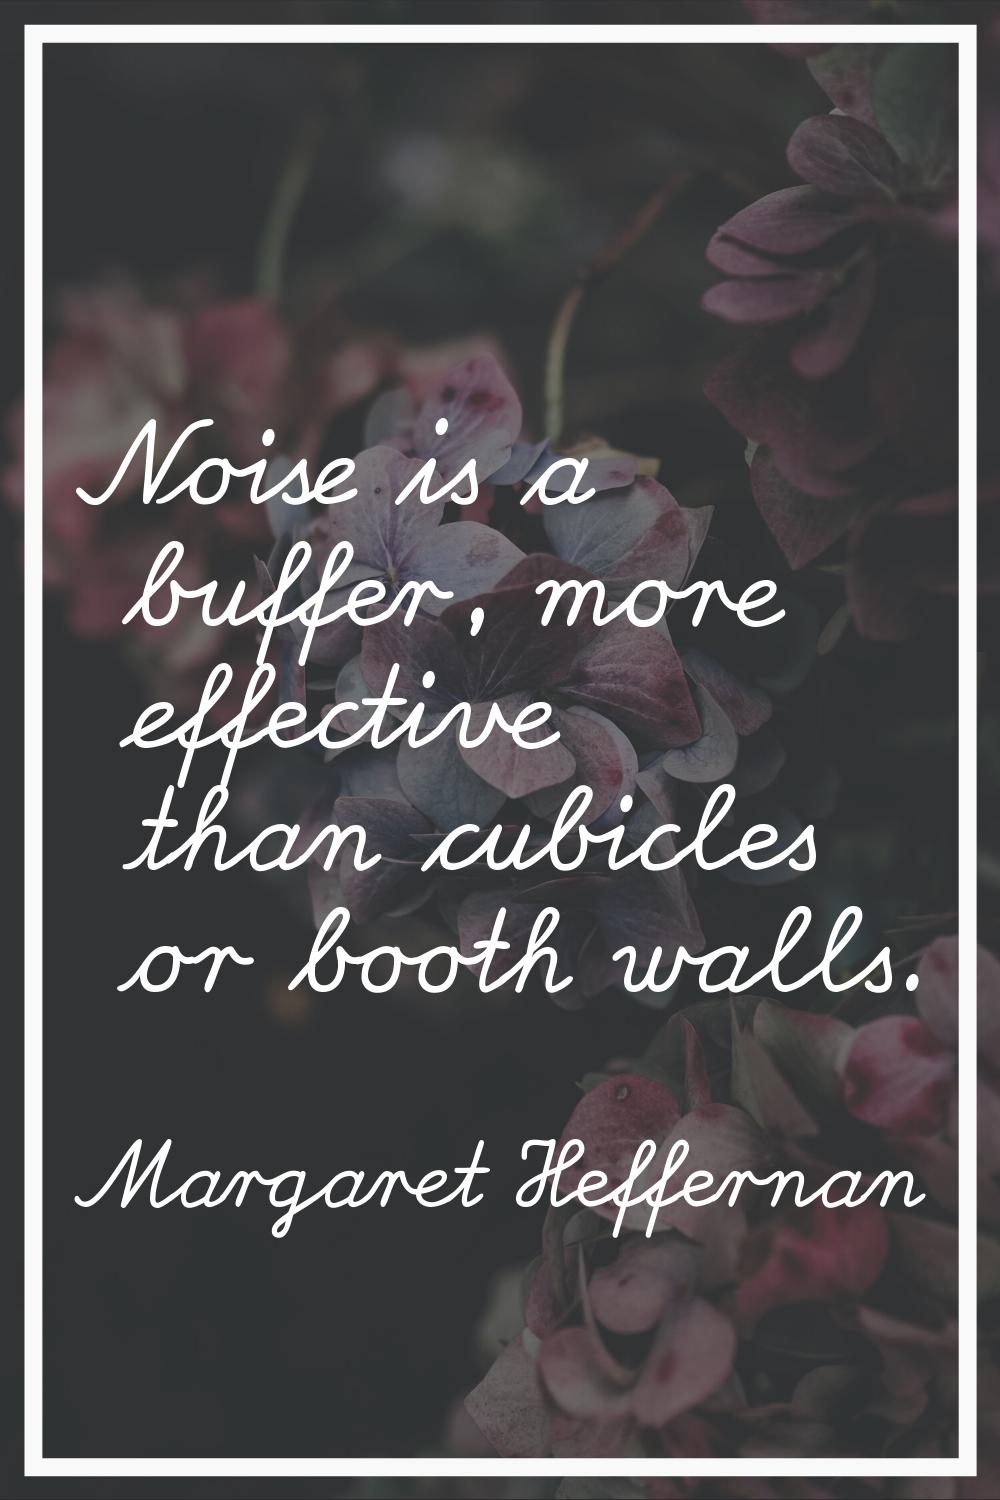 Noise is a buffer, more effective than cubicles or booth walls.